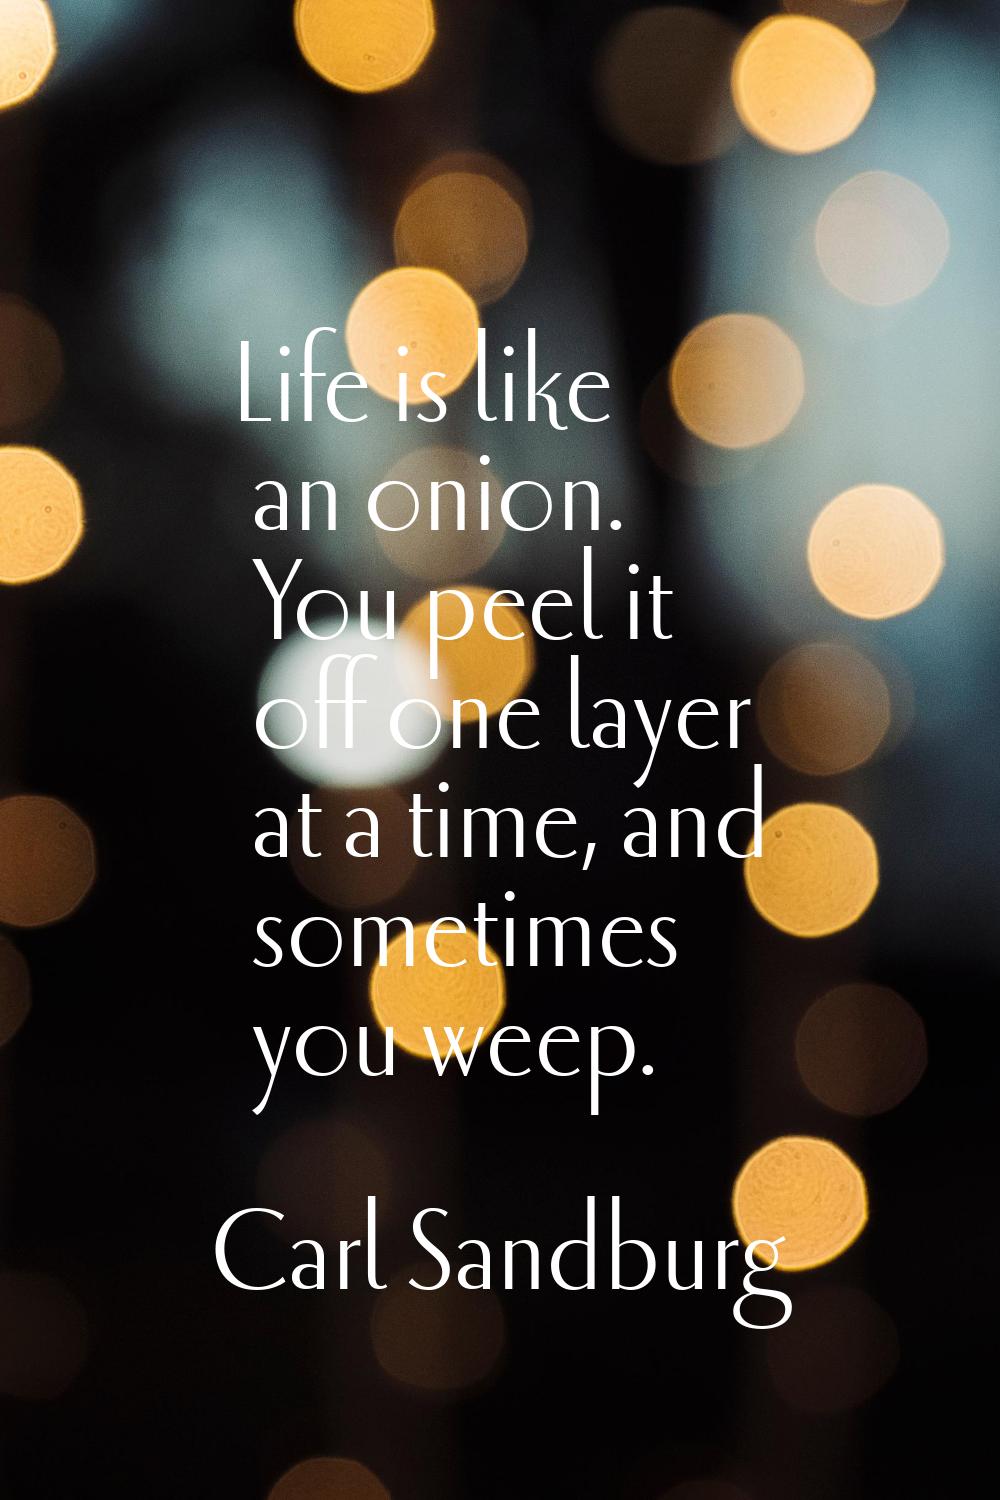 Life is like an onion. You peel it off one layer at a time, and sometimes you weep.